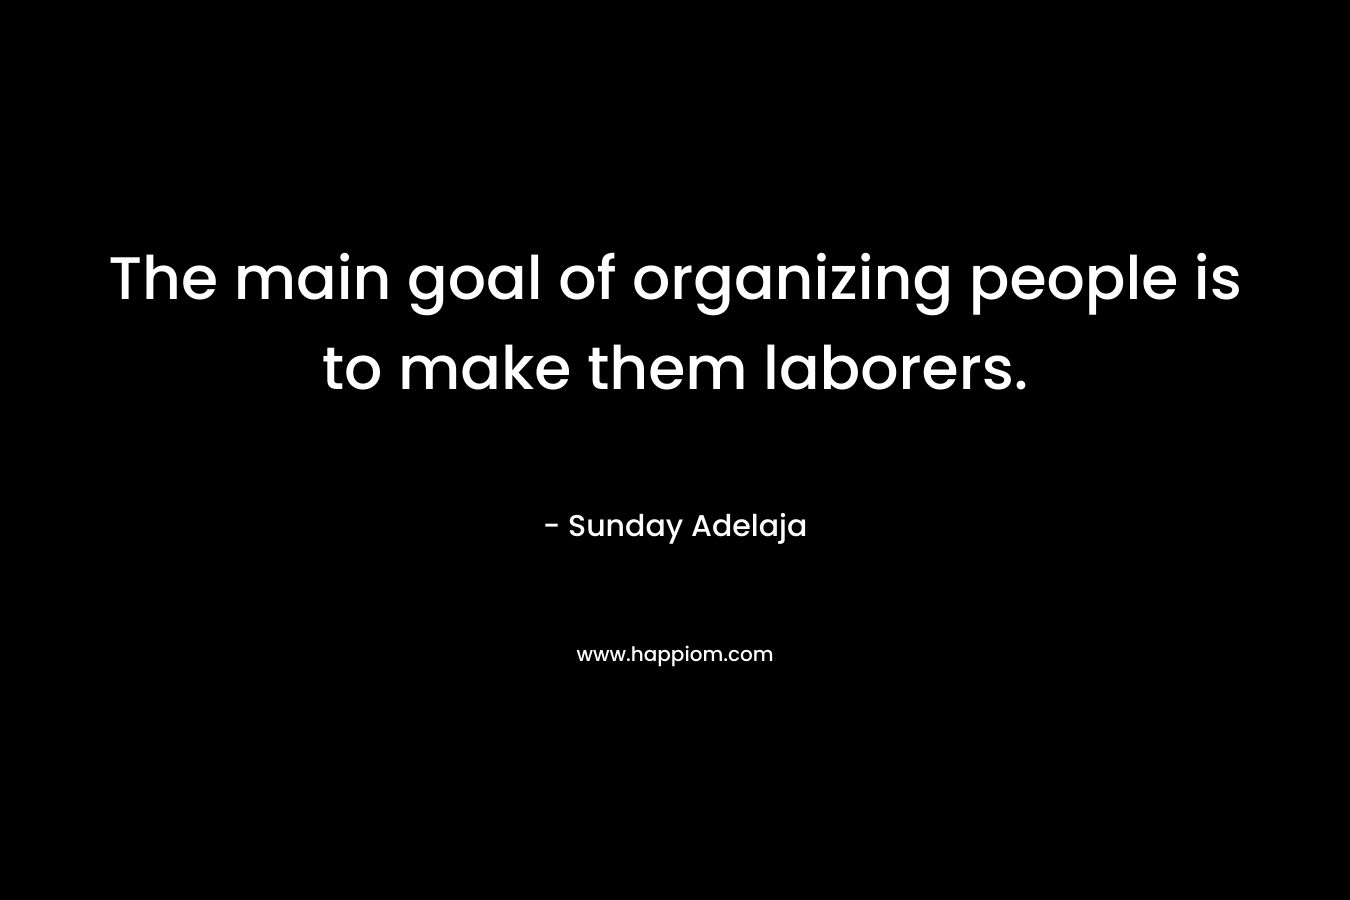 The main goal of organizing people is to make them laborers.